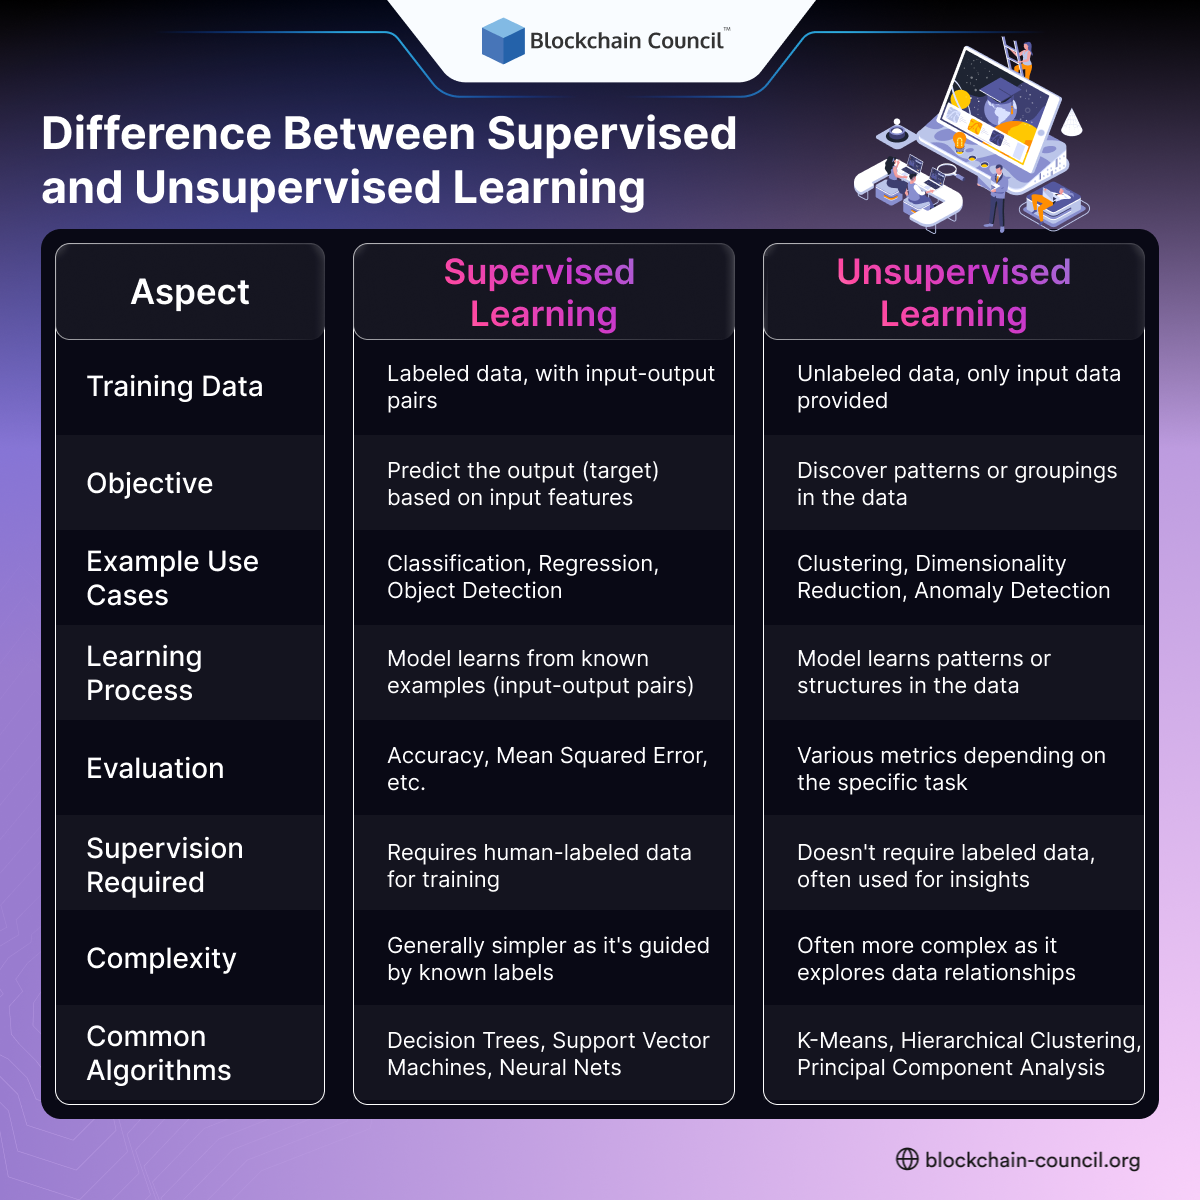 Explain the Difference Between Supervised and Unsupervised Learning